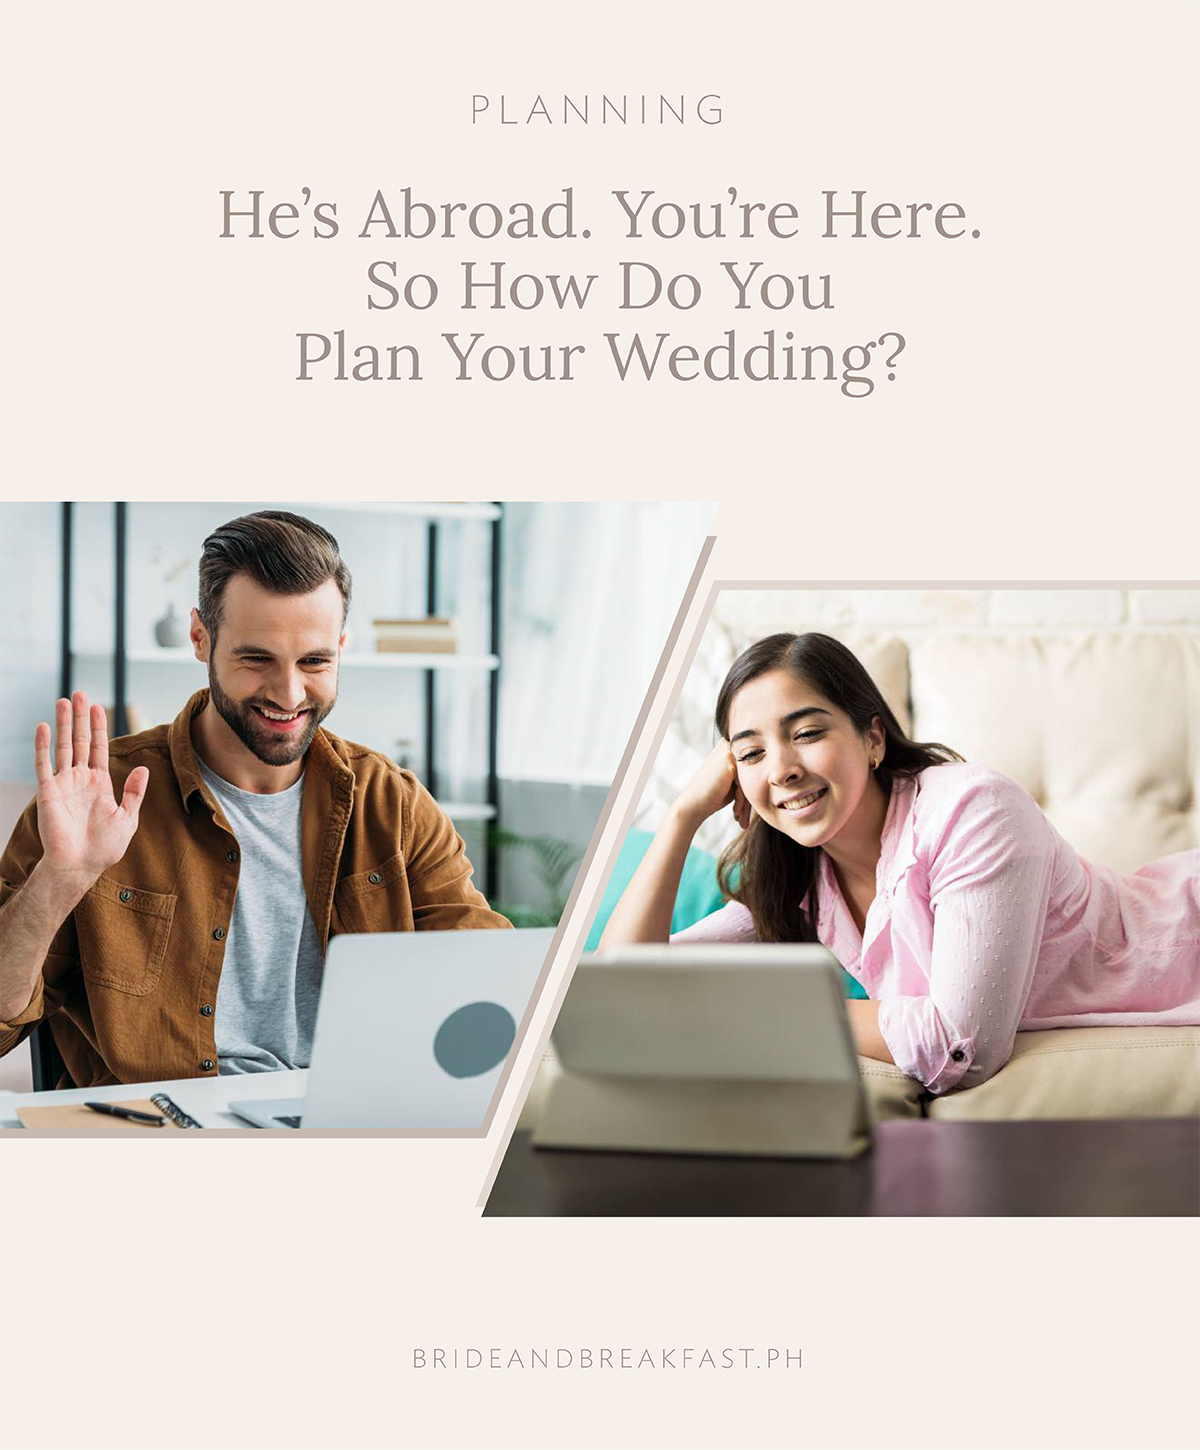 He’s Abroad. You’re Here. So How Do You Plan Your Wedding?